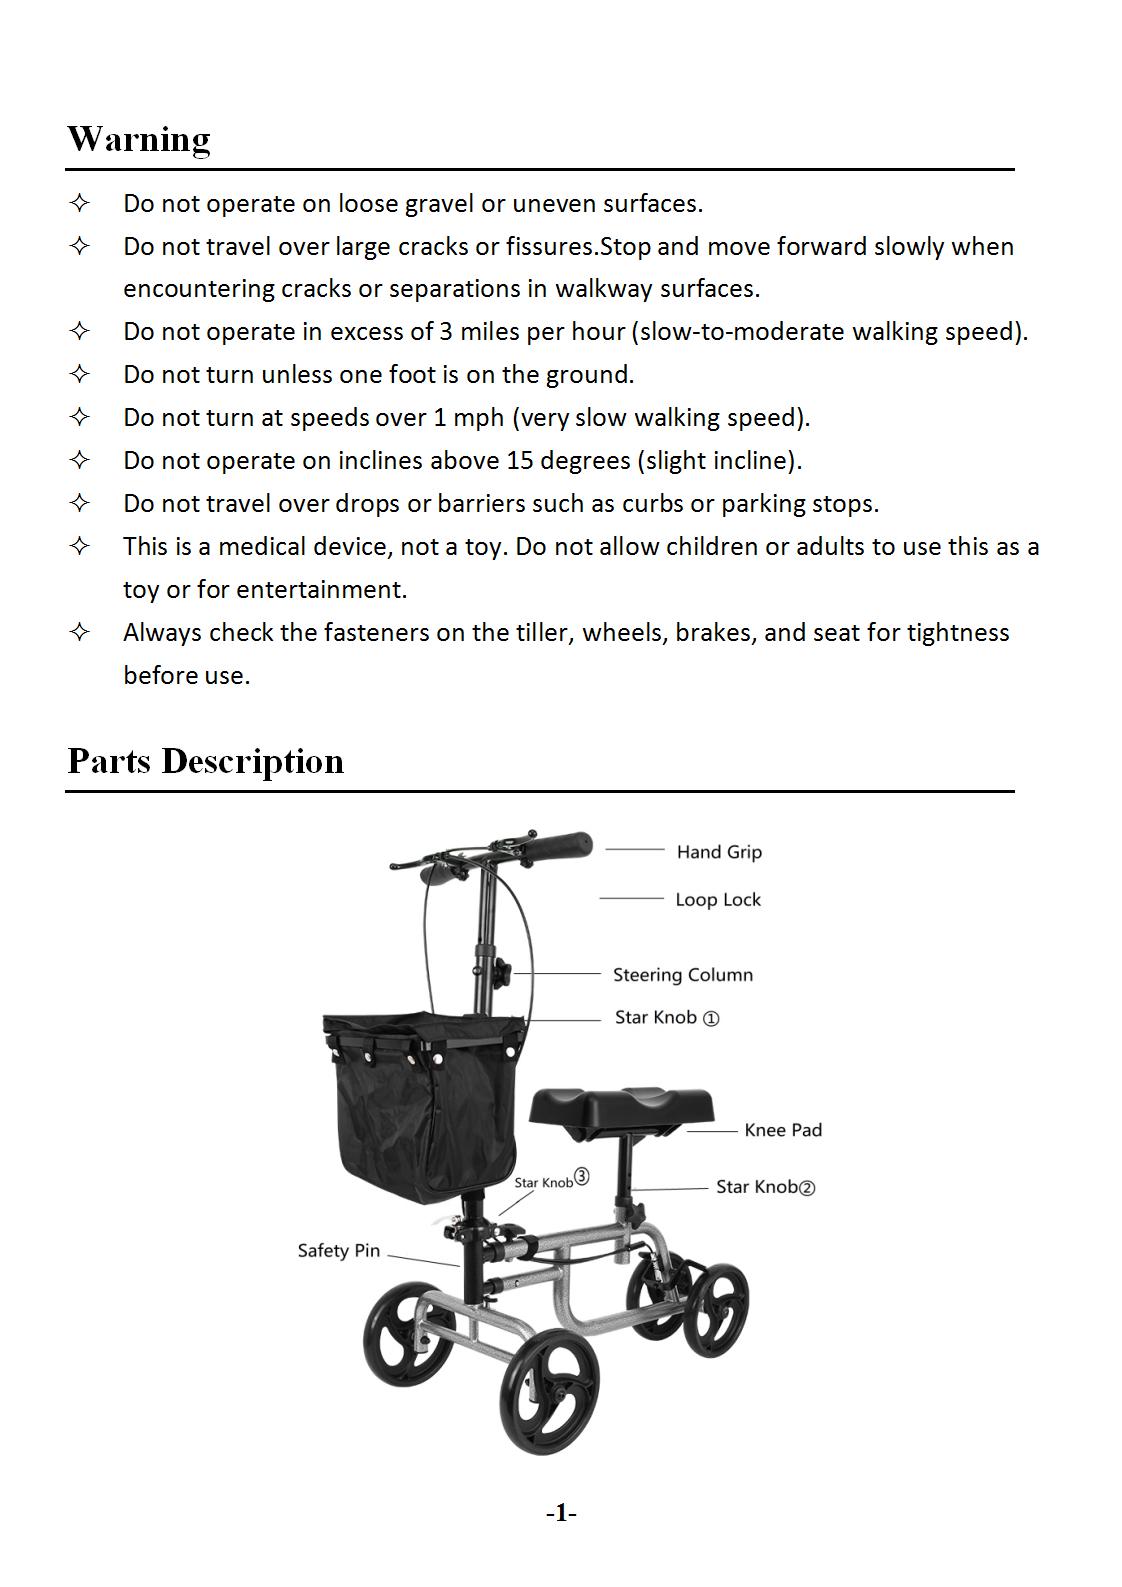 Knee-Walker-Scooter-Foldable-Adjusted-Height-Walking-Aid-Knee-Support-and-Basket-1940439-4